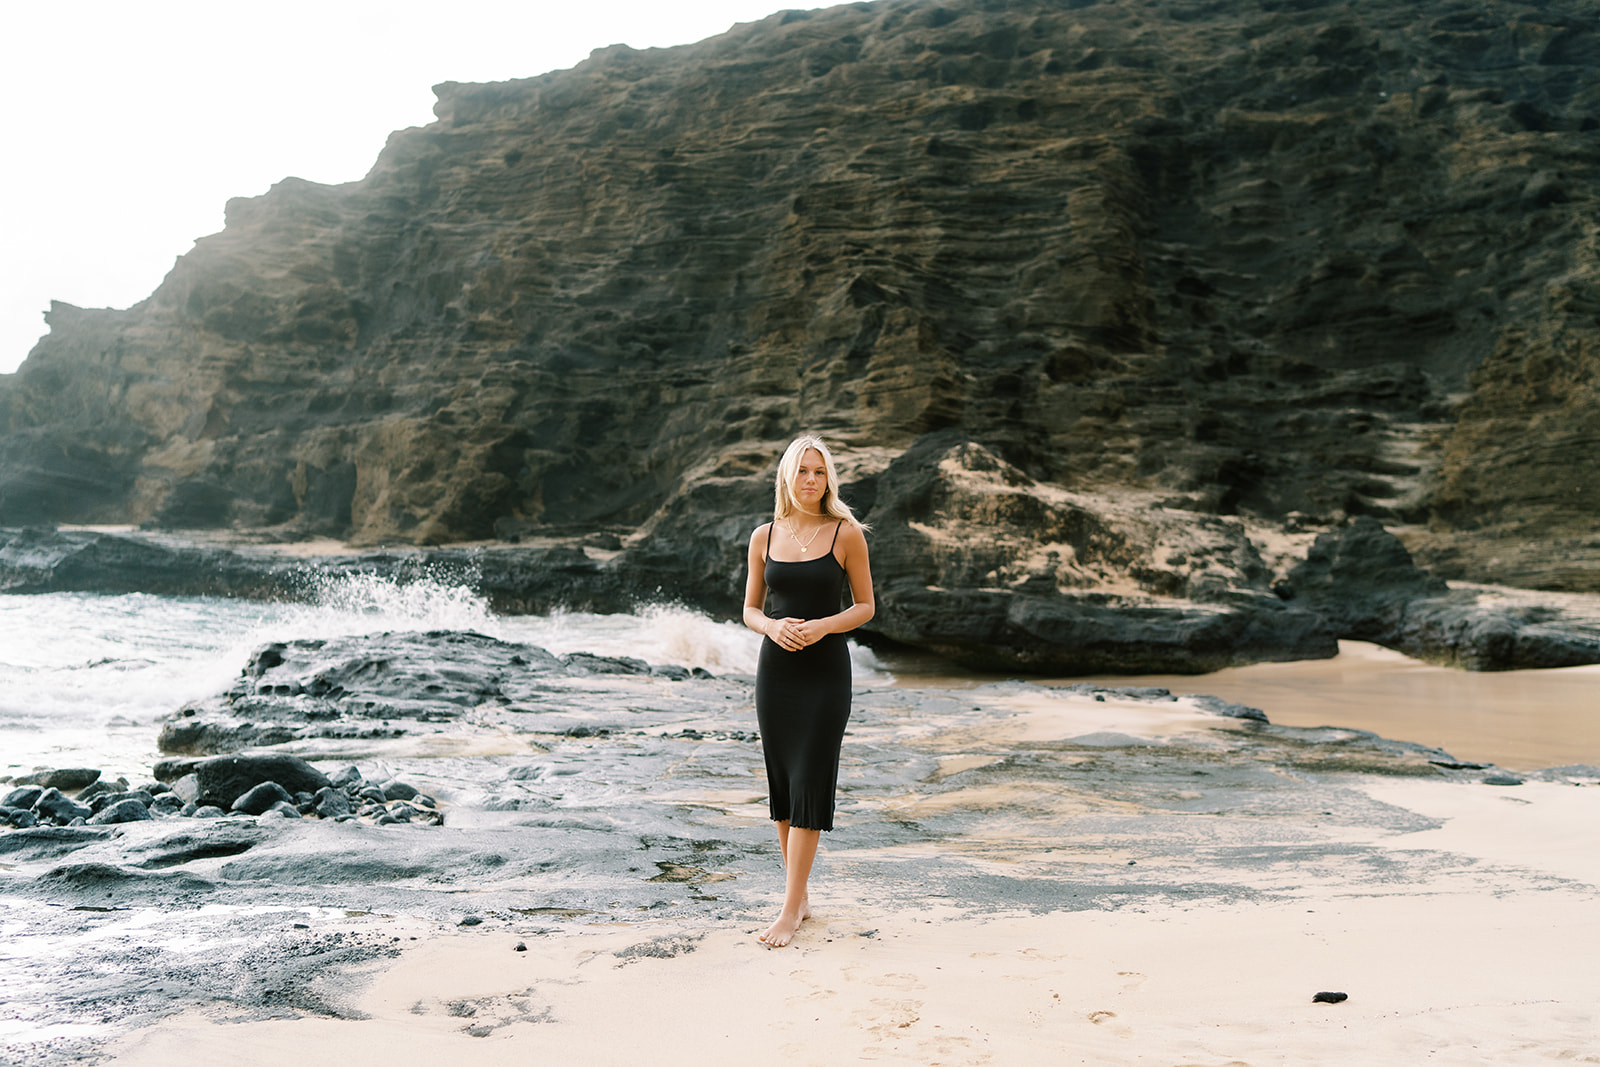 Woman standing on a beach with rocky outcrops, captured by Hawaii senior portrait photographer Megan Moura